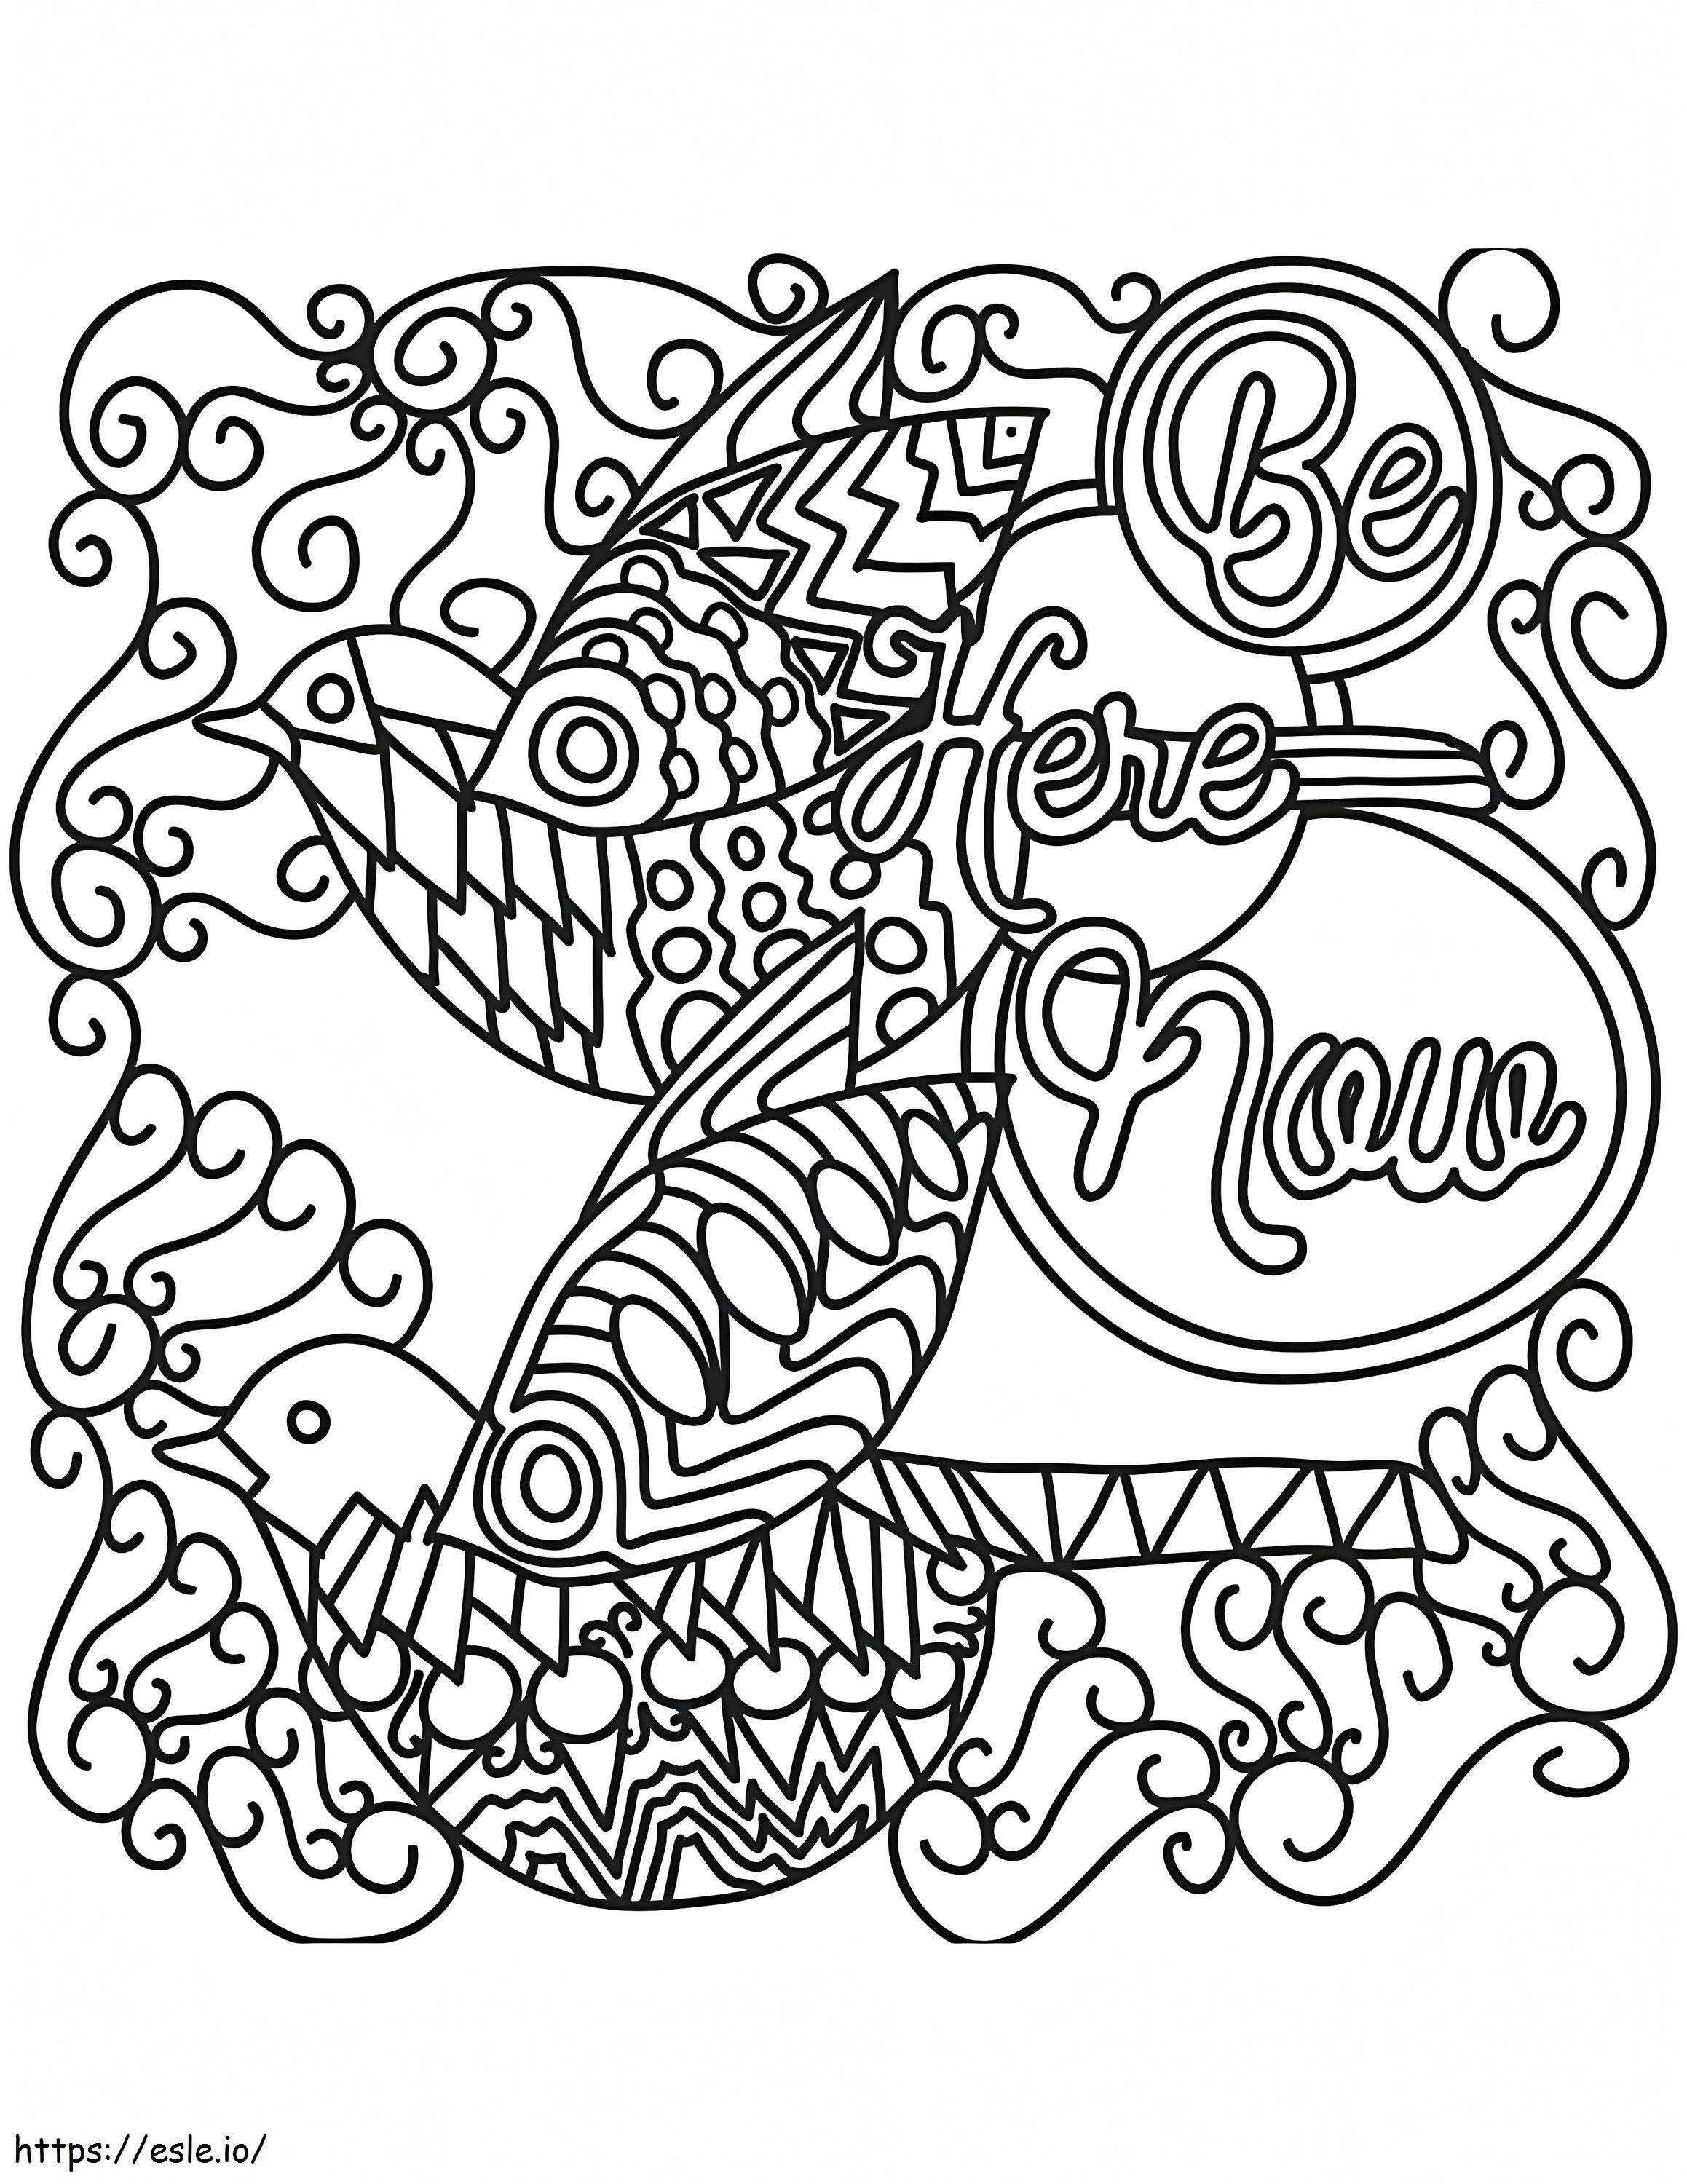 Be Here Now coloring page